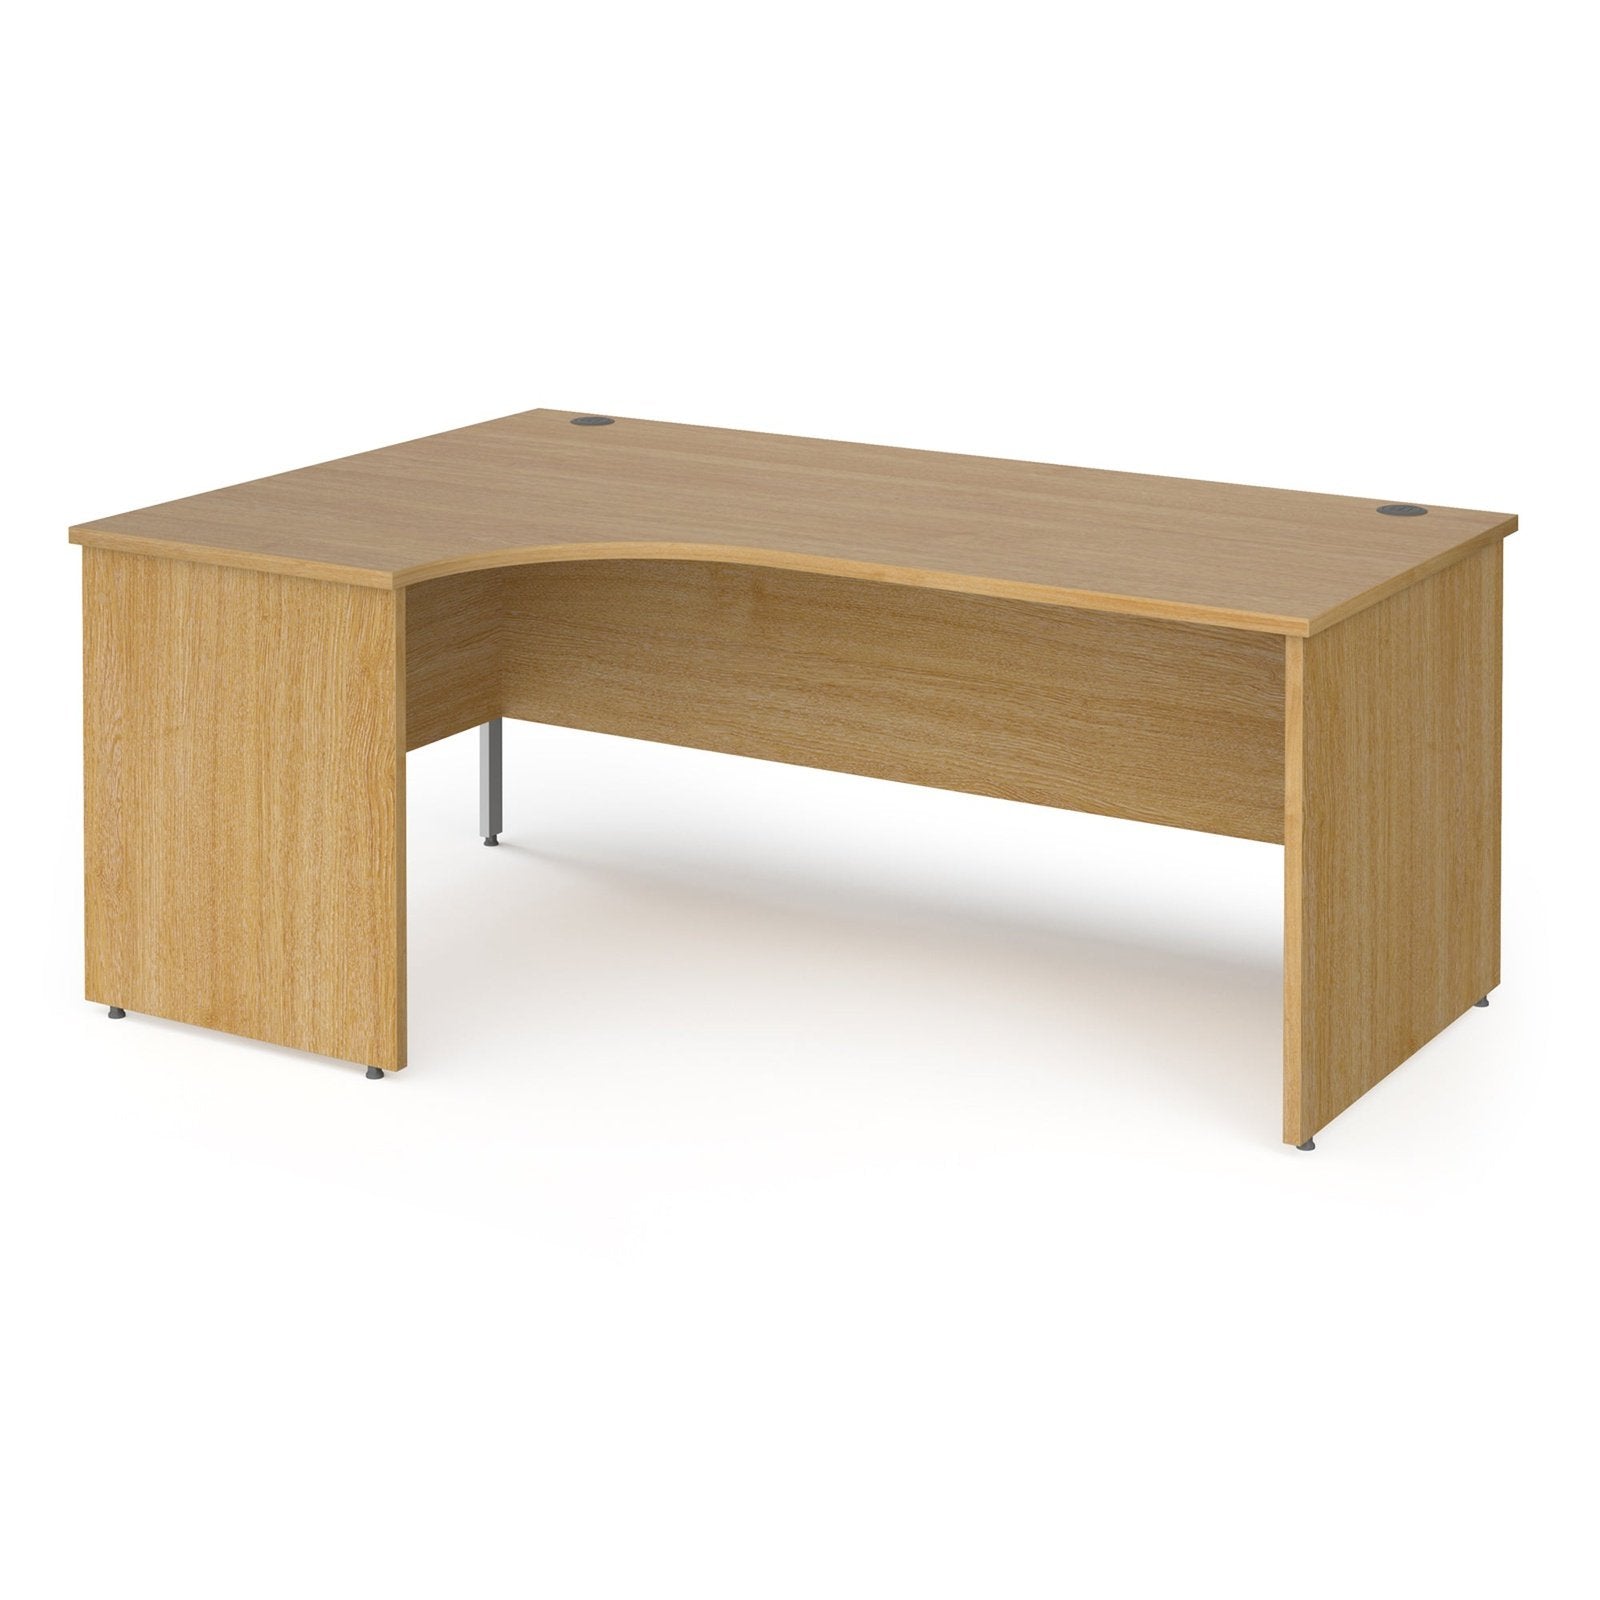 Contract 25 left hand ergonomic desk with panel ends and corner leg - Office Products Online